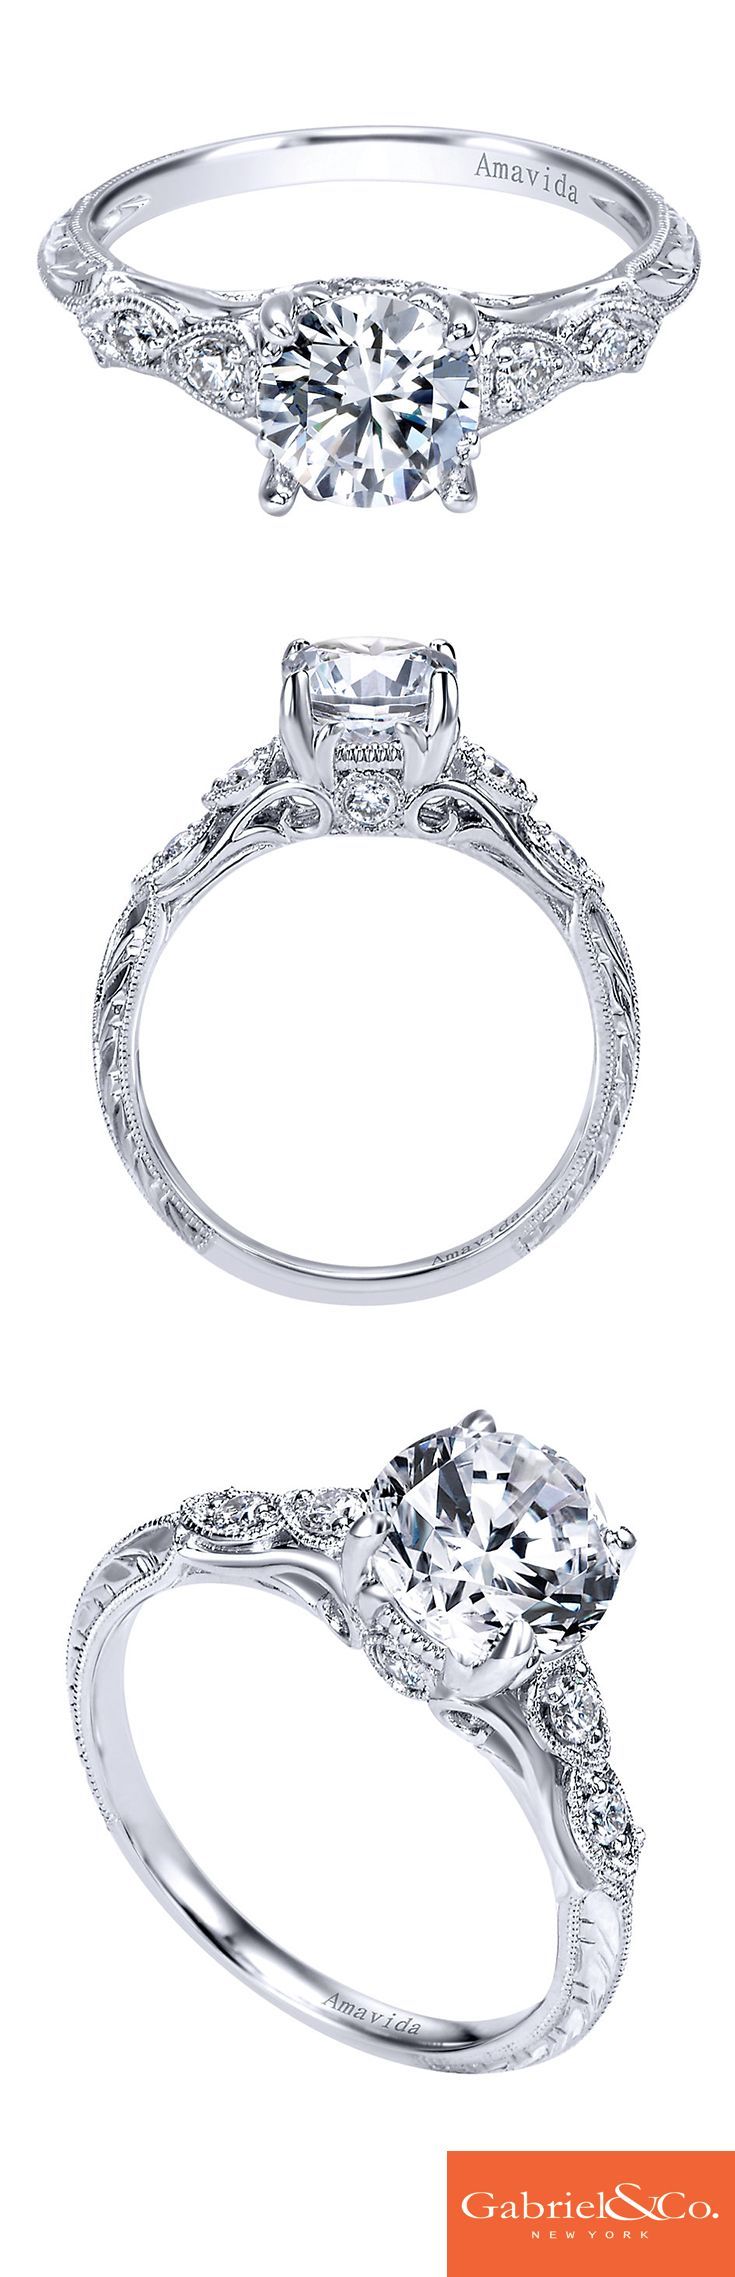 Express the many intricate and beautiful details of your love in a stunning engagement ring. This Amavida Engagement Ring by